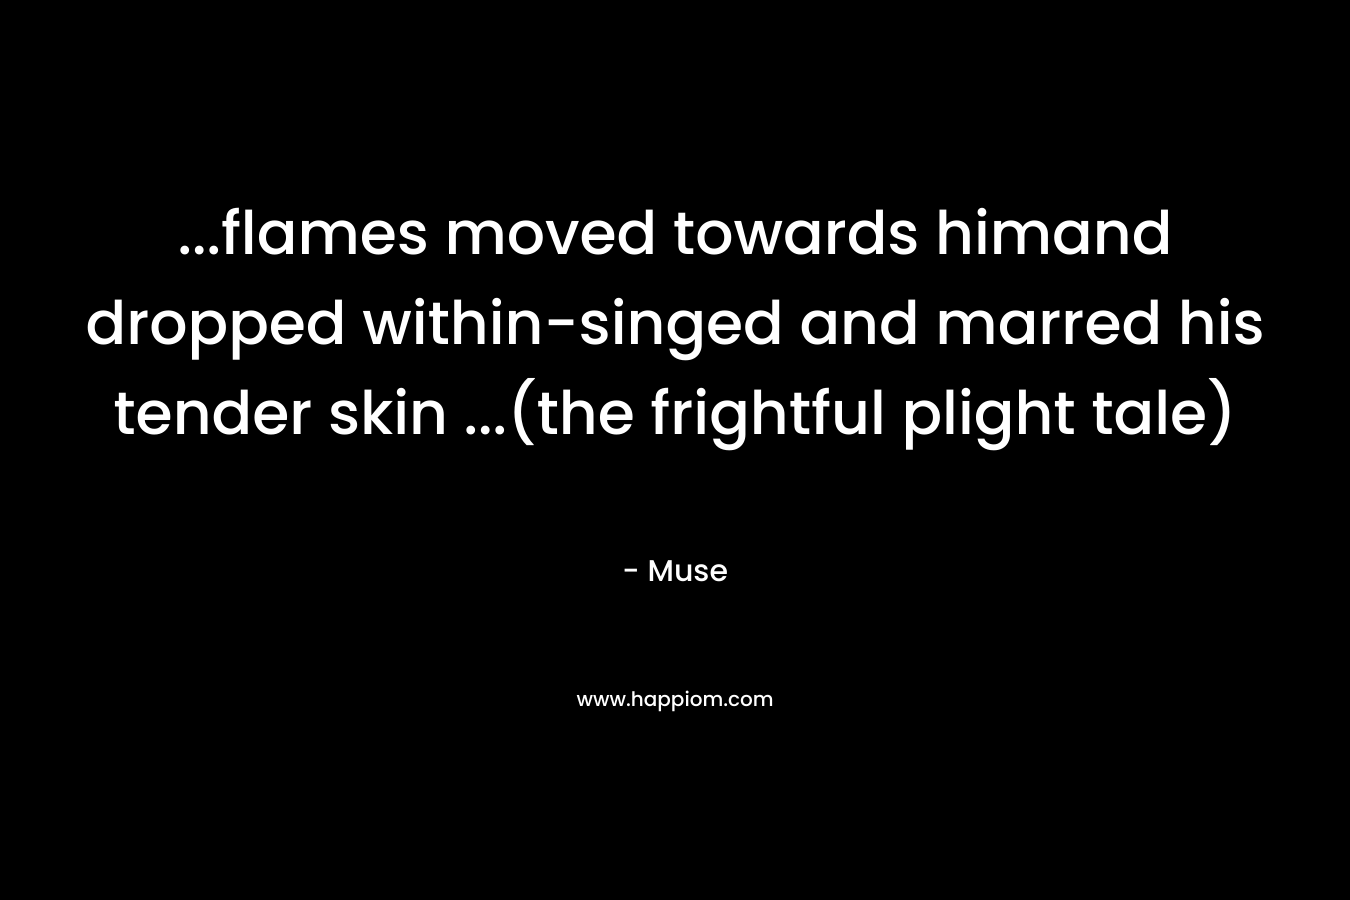 ...flames moved towards himand dropped within-singed and marred his tender skin ...(the frightful plight tale)